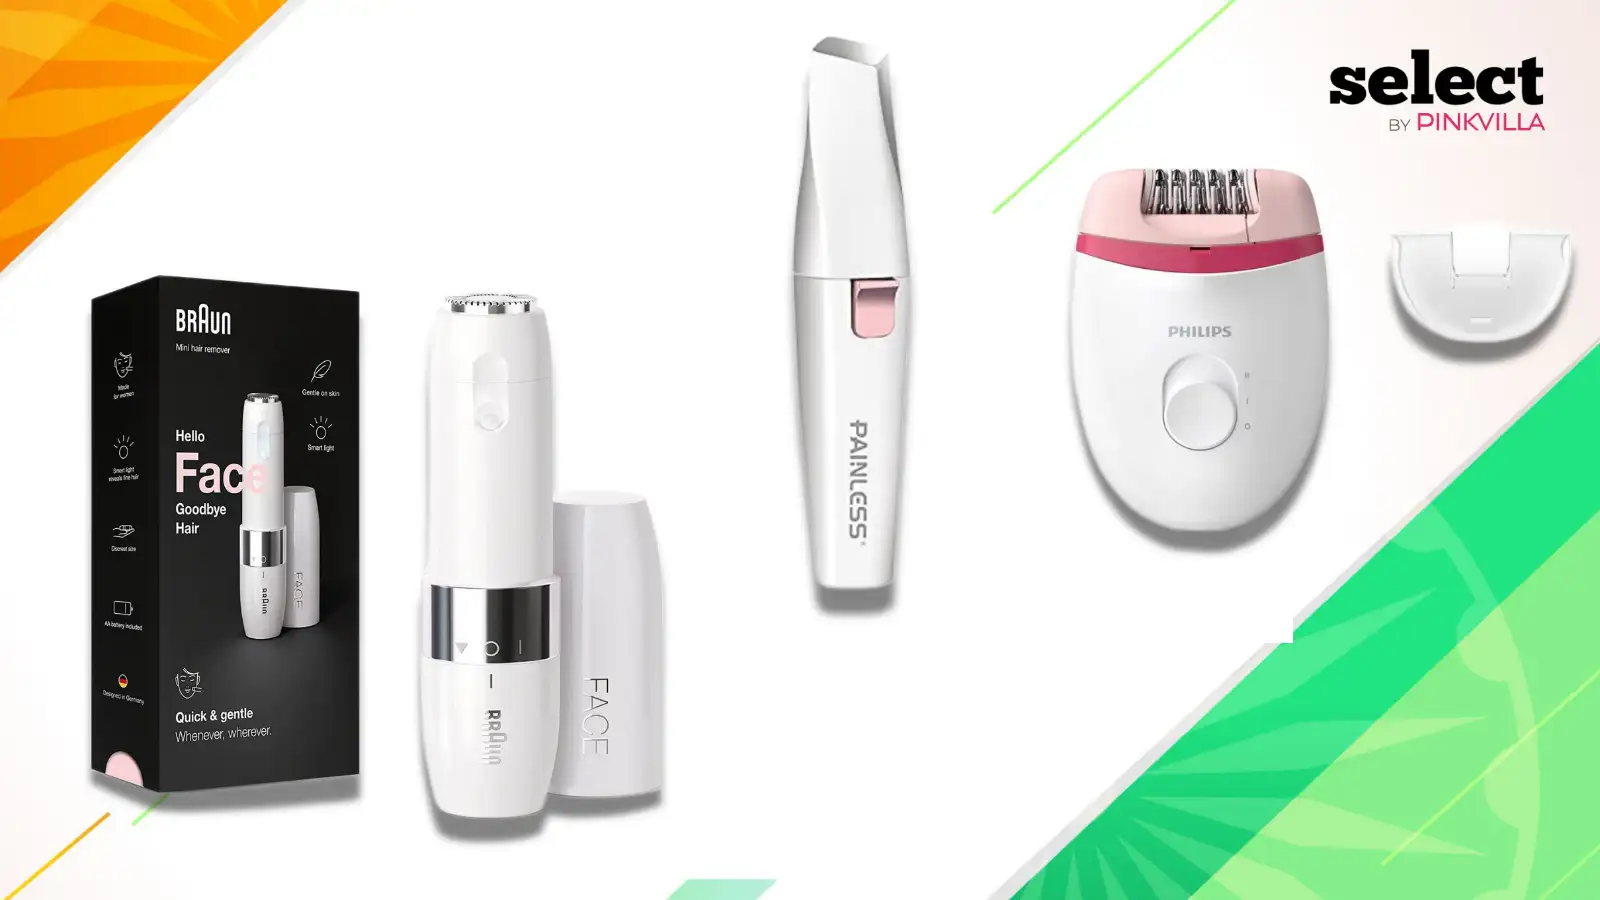 Goodbye, unwanted face and body hair! This best-selling Braun